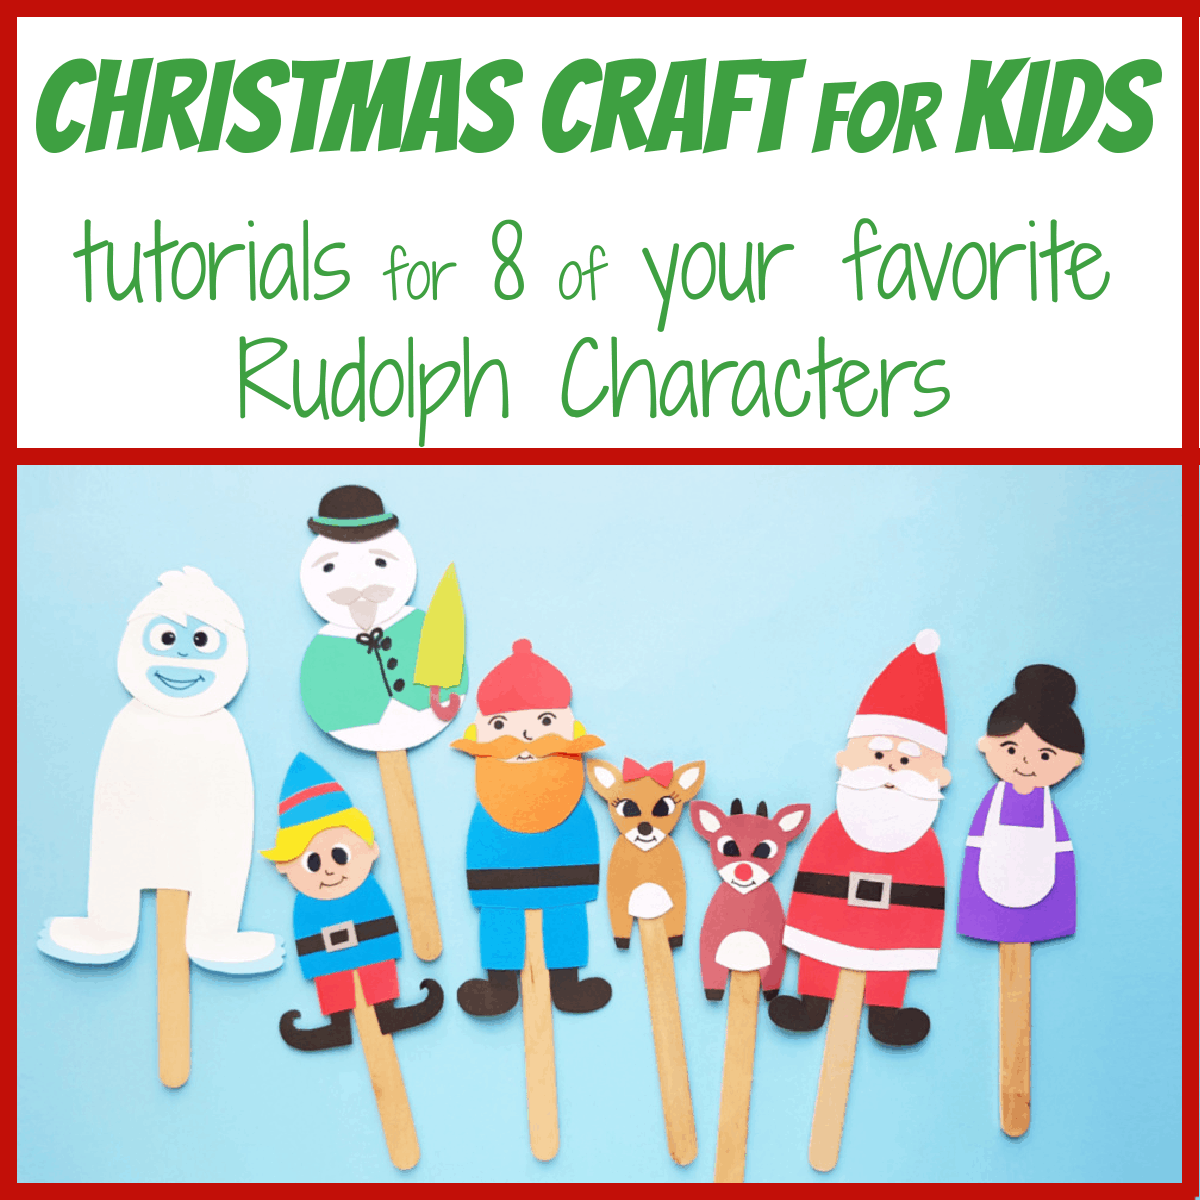 8 colorful Christmas character puppets craft